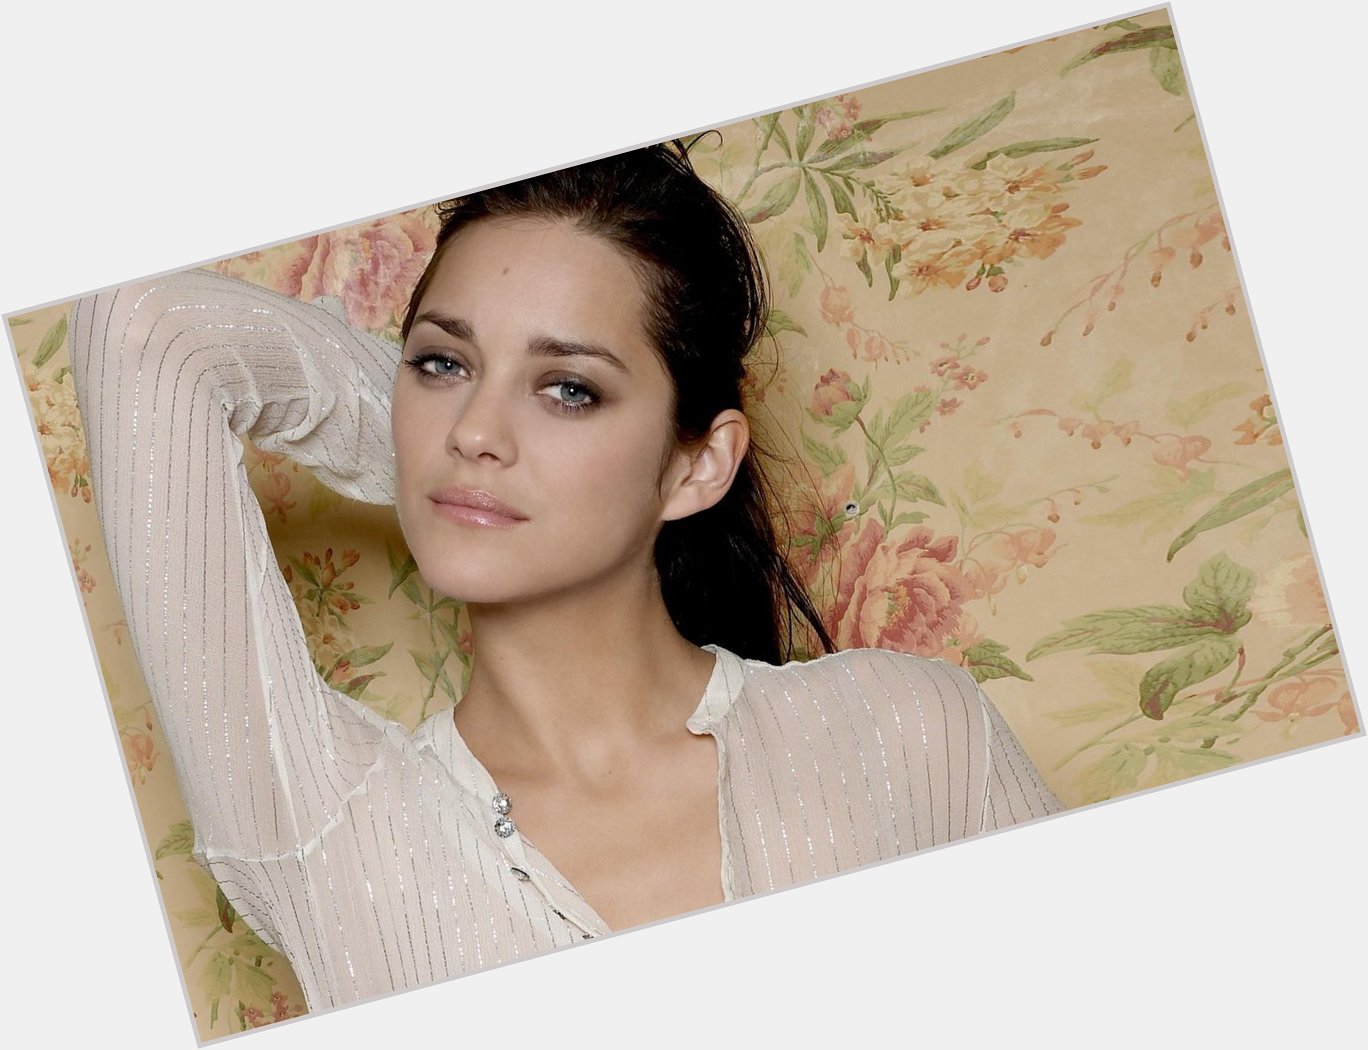 Happy birthday Marion Cotillard - 40 today!... and to correct myself Monica Bellucci is 51!! 